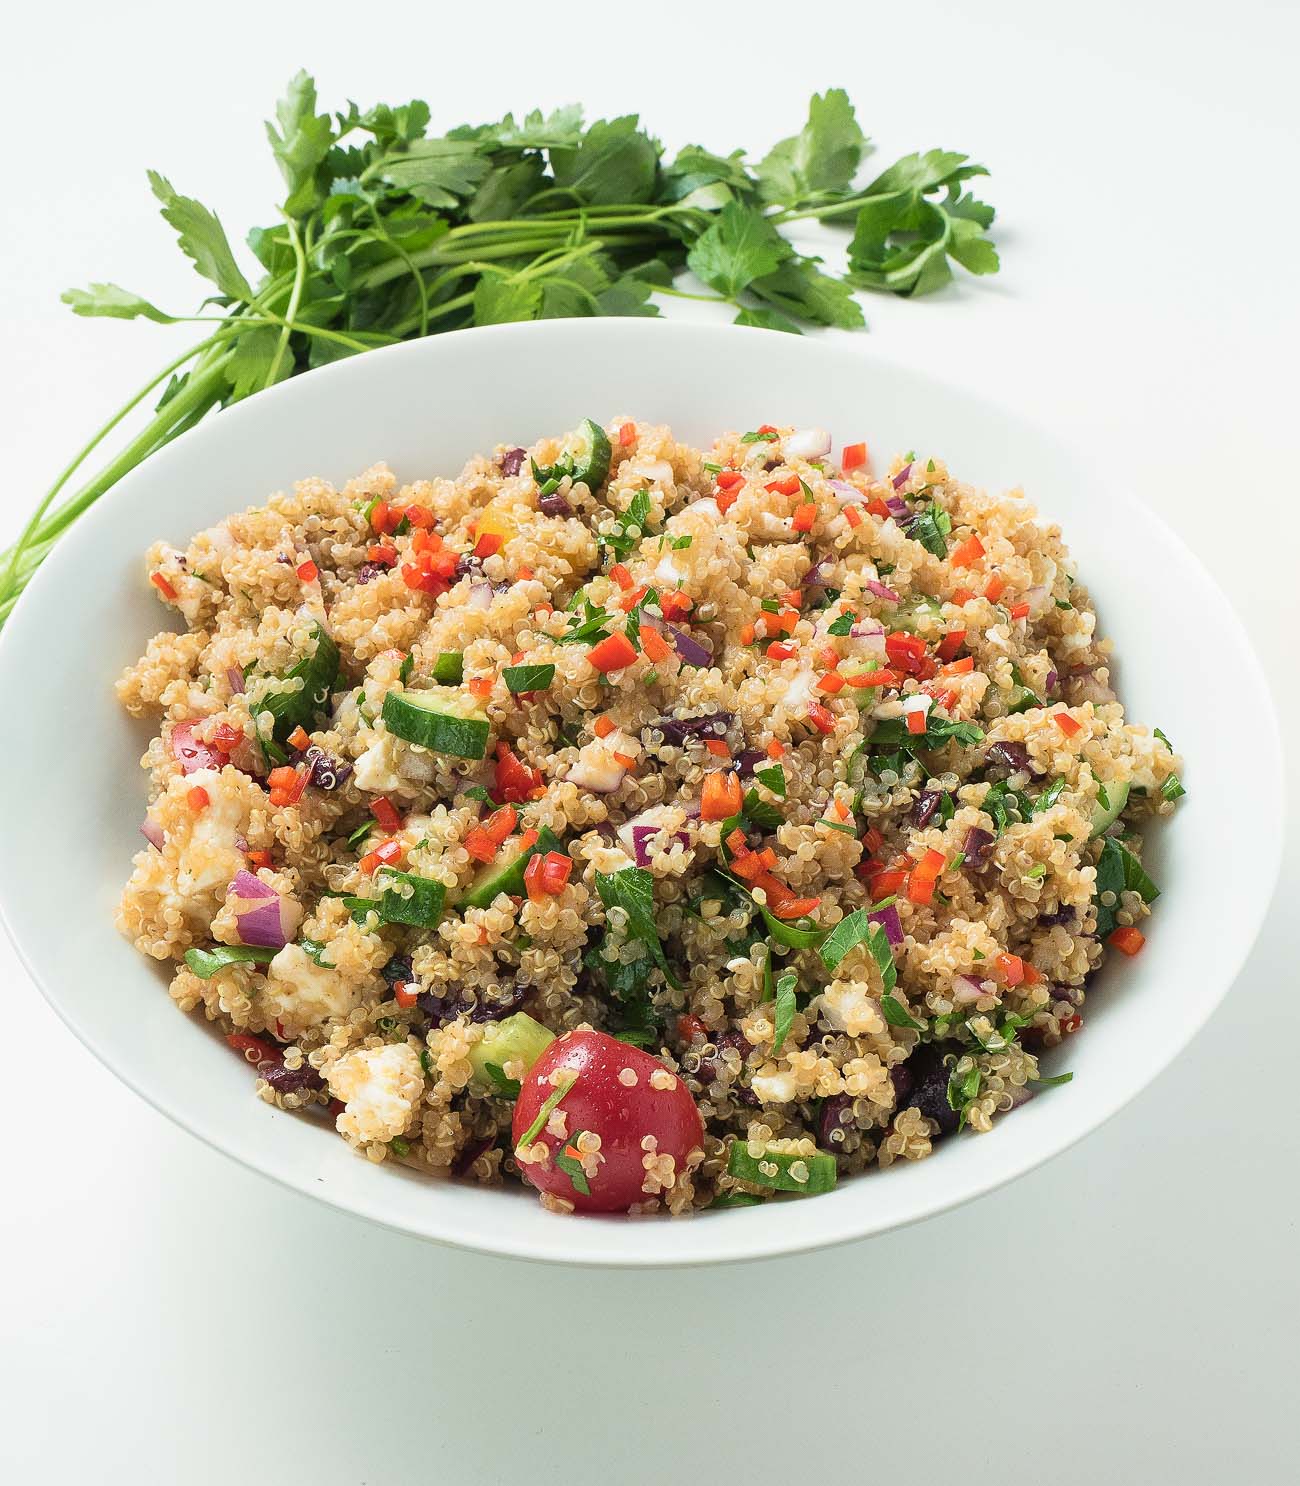 Mediterranean quinoa salad explodes with big flavours of feta, olives, lemon and tomatoes.